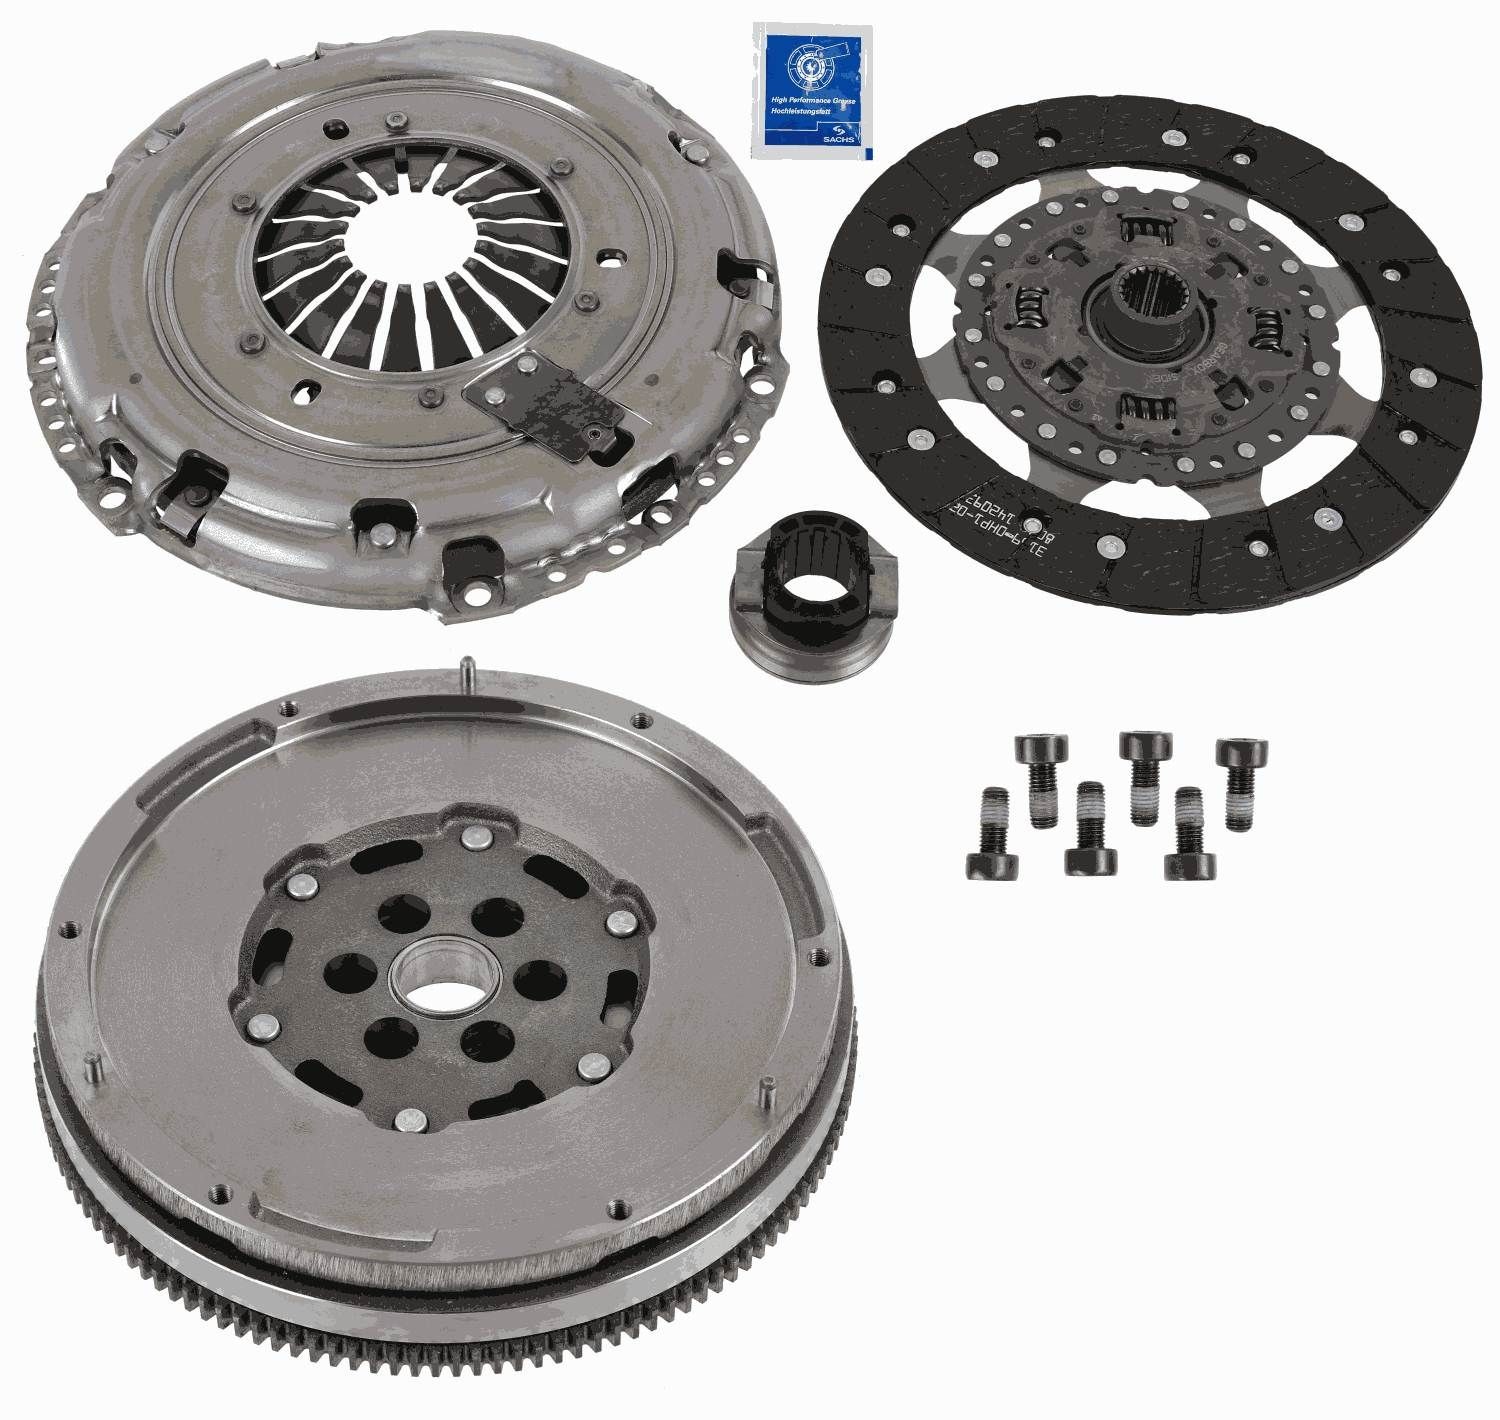 Original SACHS Clutch replacement kit 2290 601 128 for CITROЁN BERLINGO